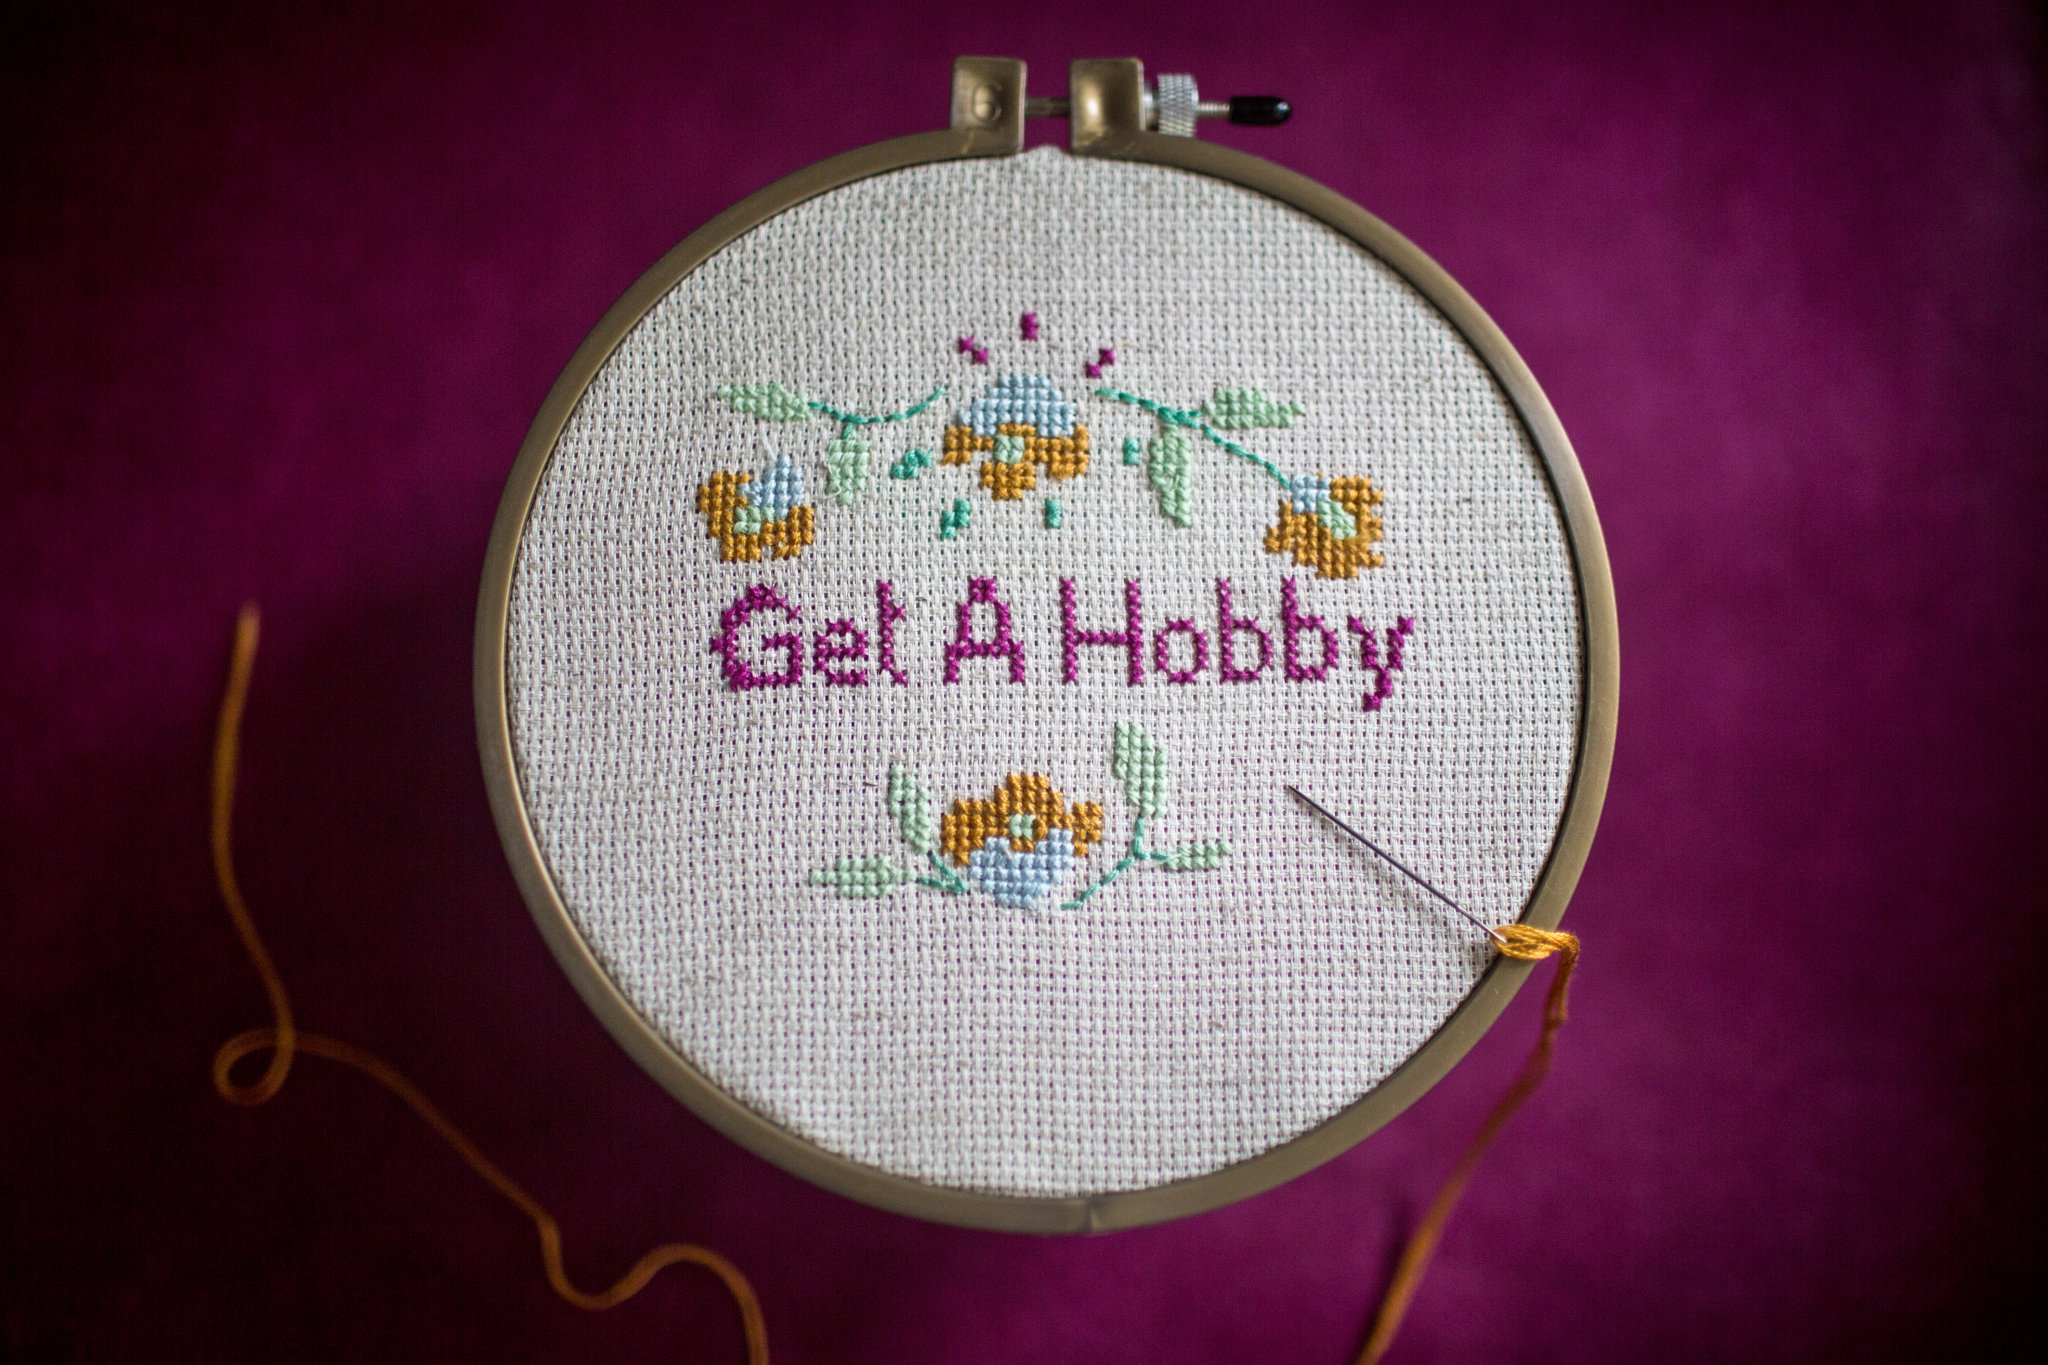 Having a hobby is good for you. Here's how to find one